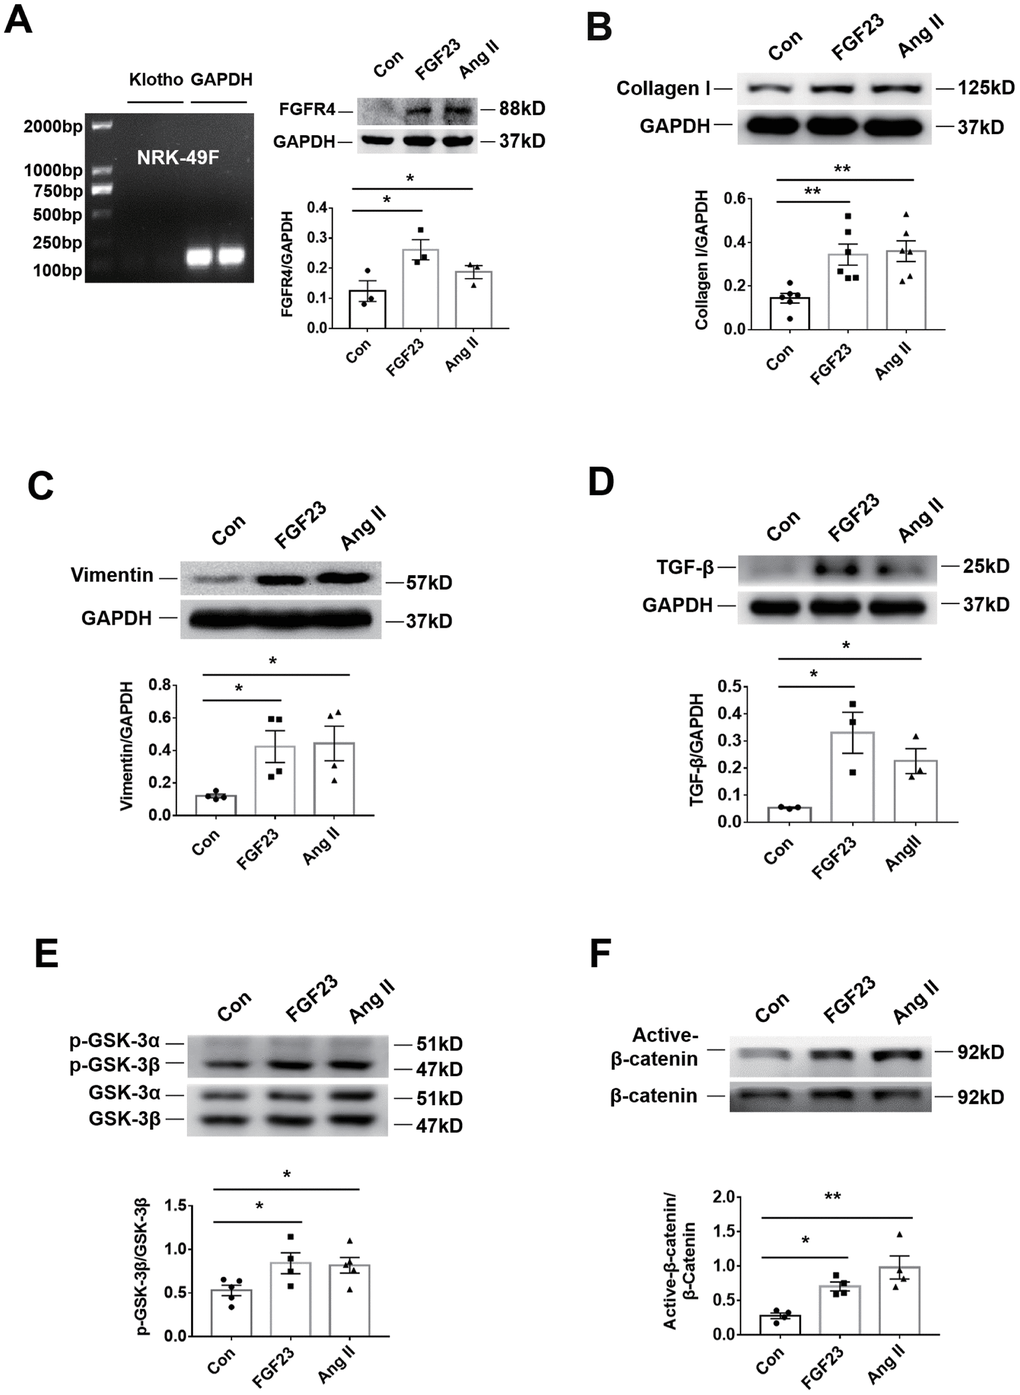 Recombinant FGF23 promotes activation of fibrosis-related signaling pathways in NRK-49F cultured kidney fibroblasts. (A) Expression of Klotho mRNA was not detected. Western blotting showed that FGFR4 protein expression was upregulated by treatment with recombinant FGF23 (100 ng/mL) or angiotensin II (Ang II, 1 μM). (B) Western blot of collagen I. (C) Western blot of vimentin. (D) Western blot of TGF-β. (E) Western blot of p-GSK-3β. (F) Western blot of active-β-catenin. Con, control; FGF23, fibroblast growth factor 23; Ang II, angiotensin II. *P **P 